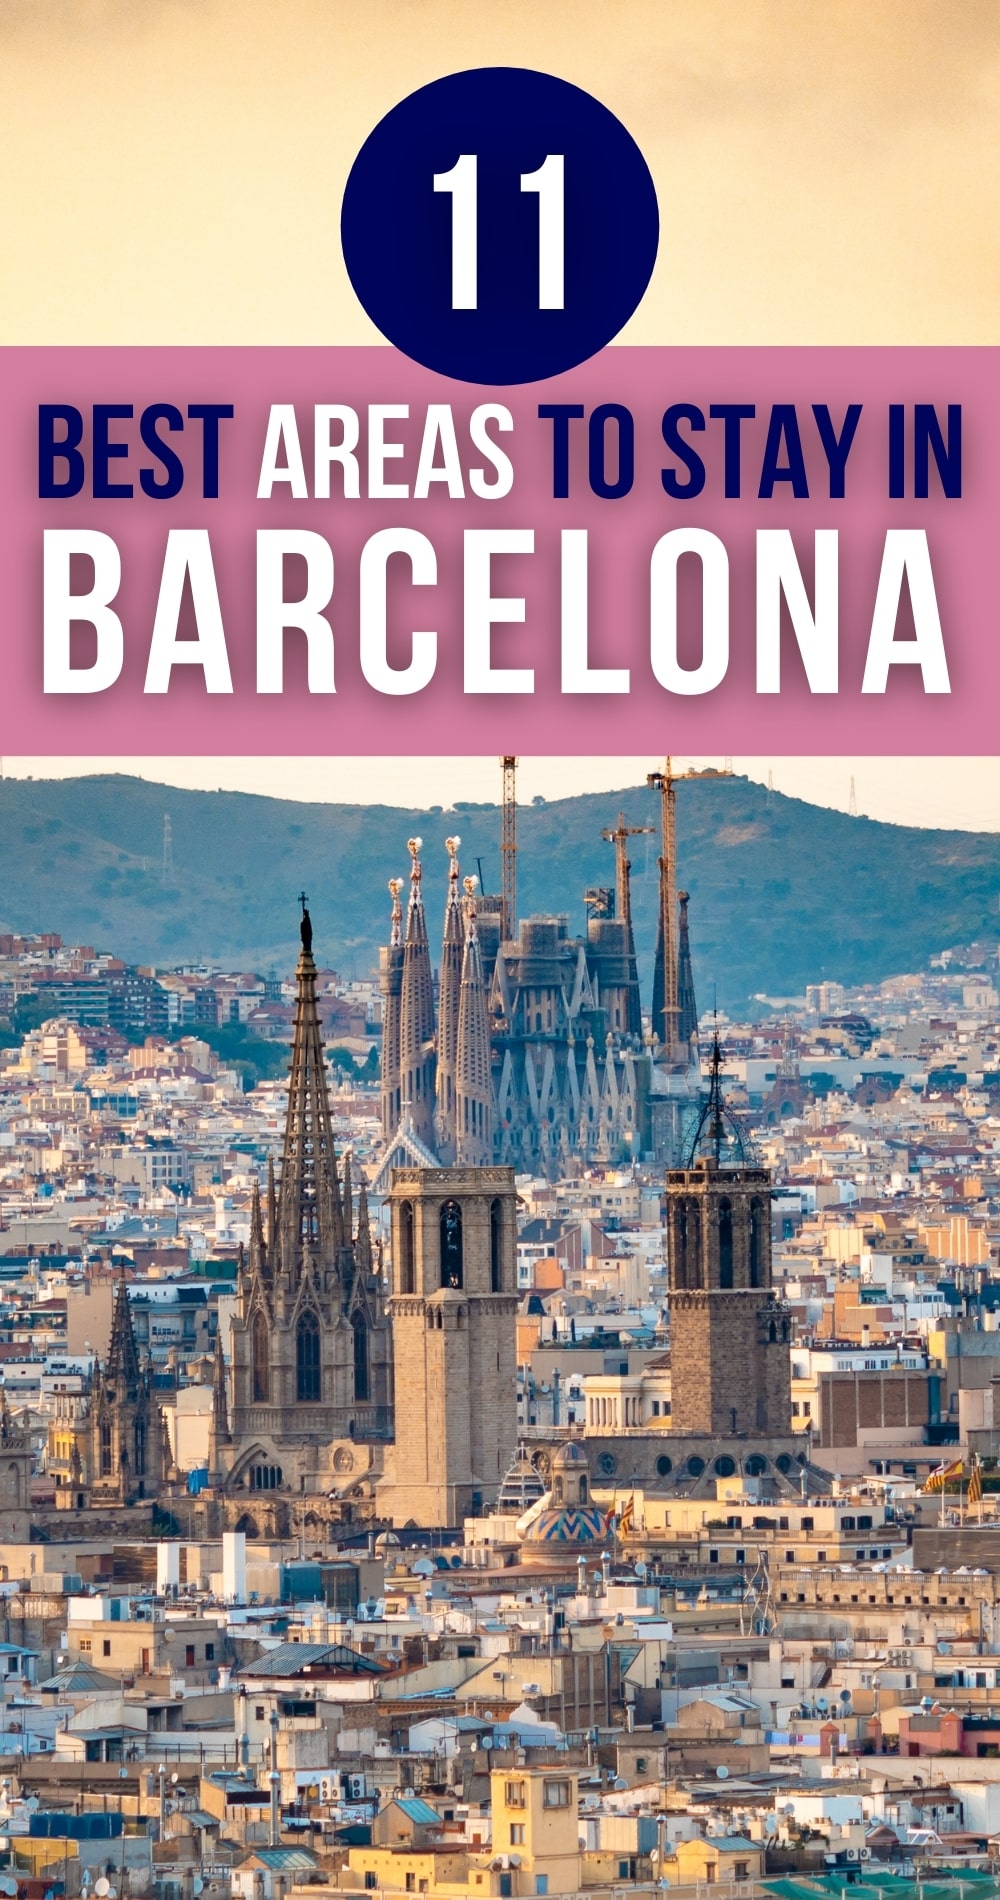 The 11 Best Areas to Stay in Barcelona for Tourists